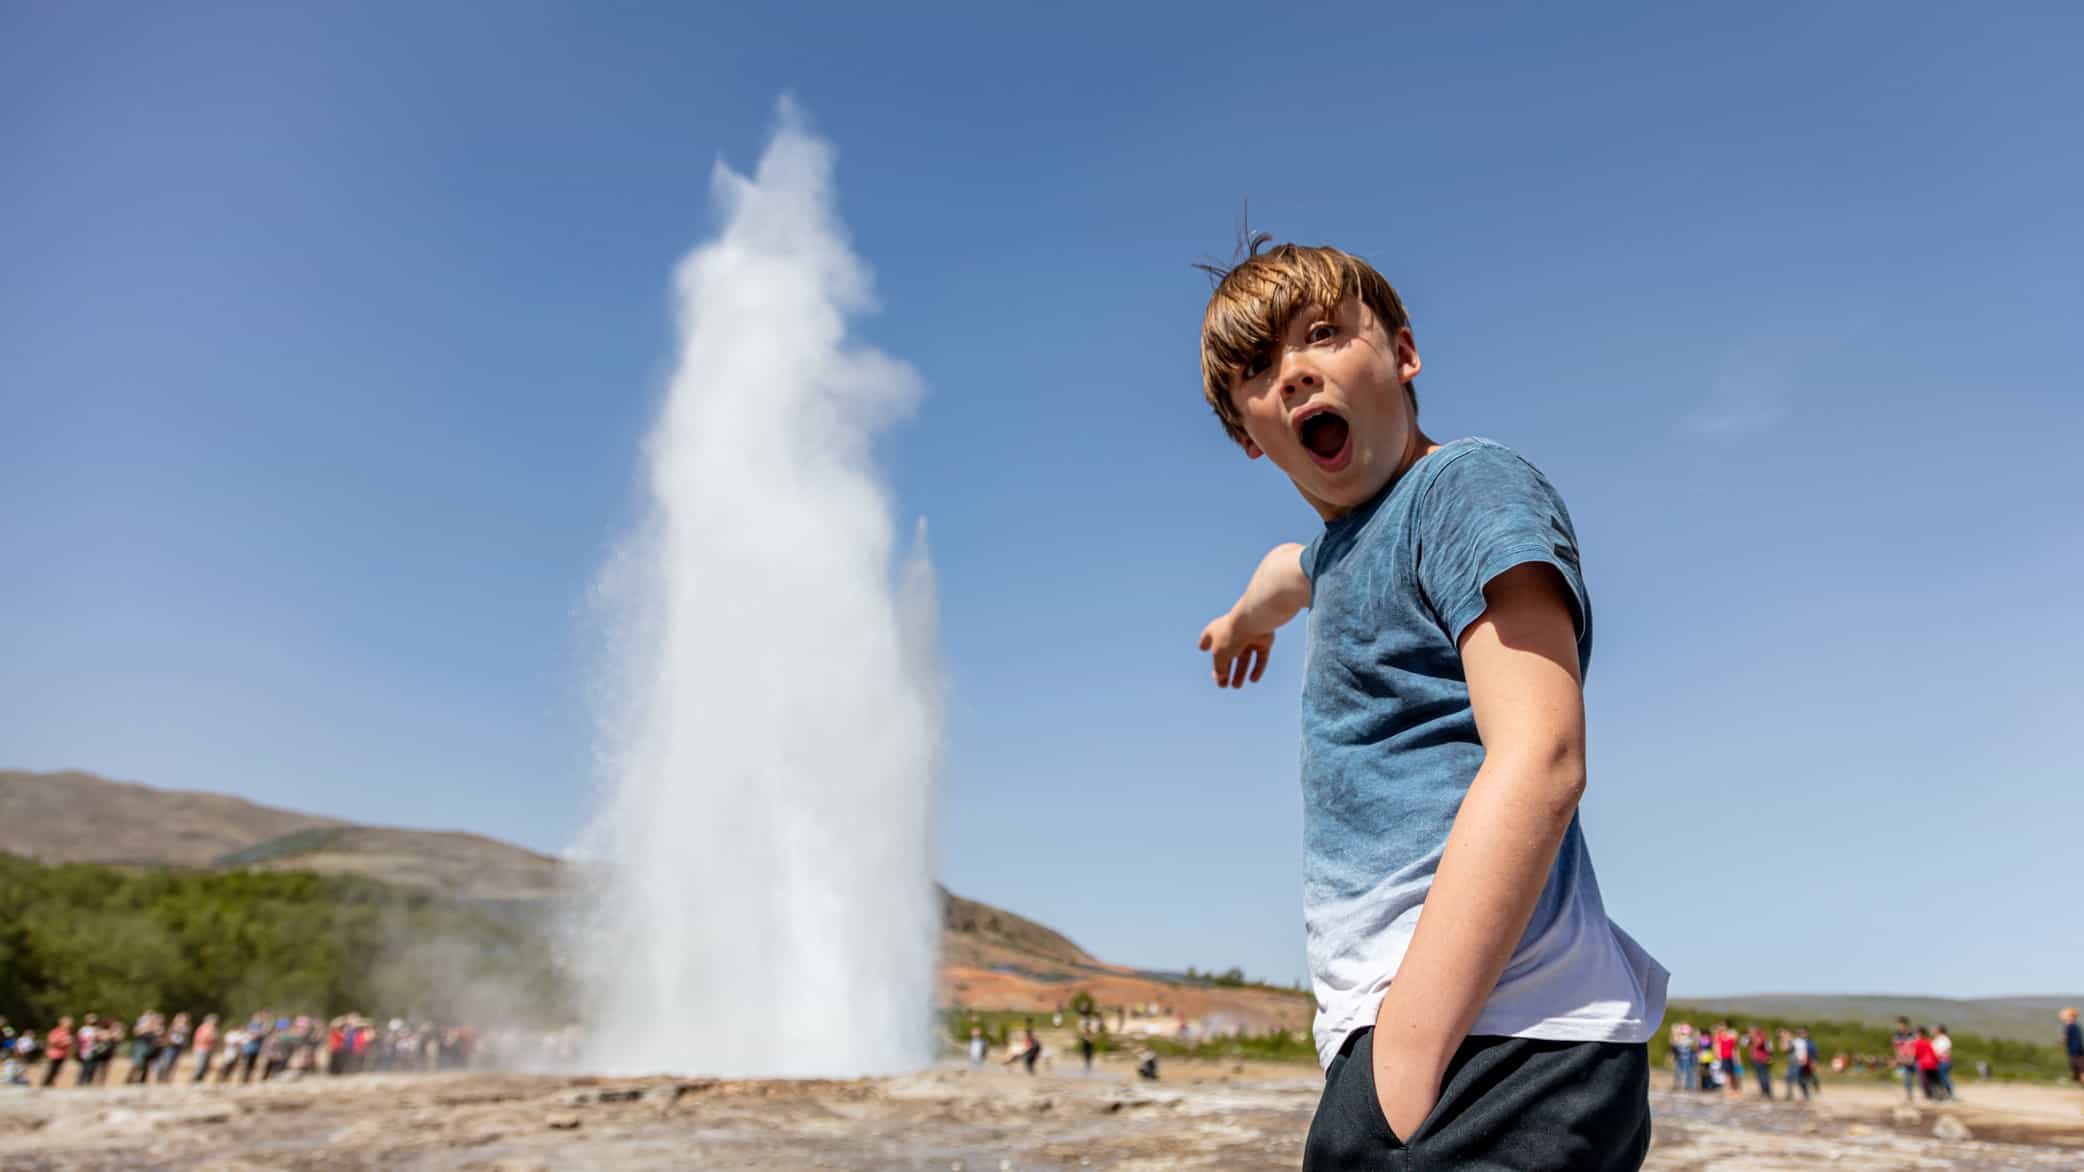 A boy is wowed at a surge of water from a blowhole.